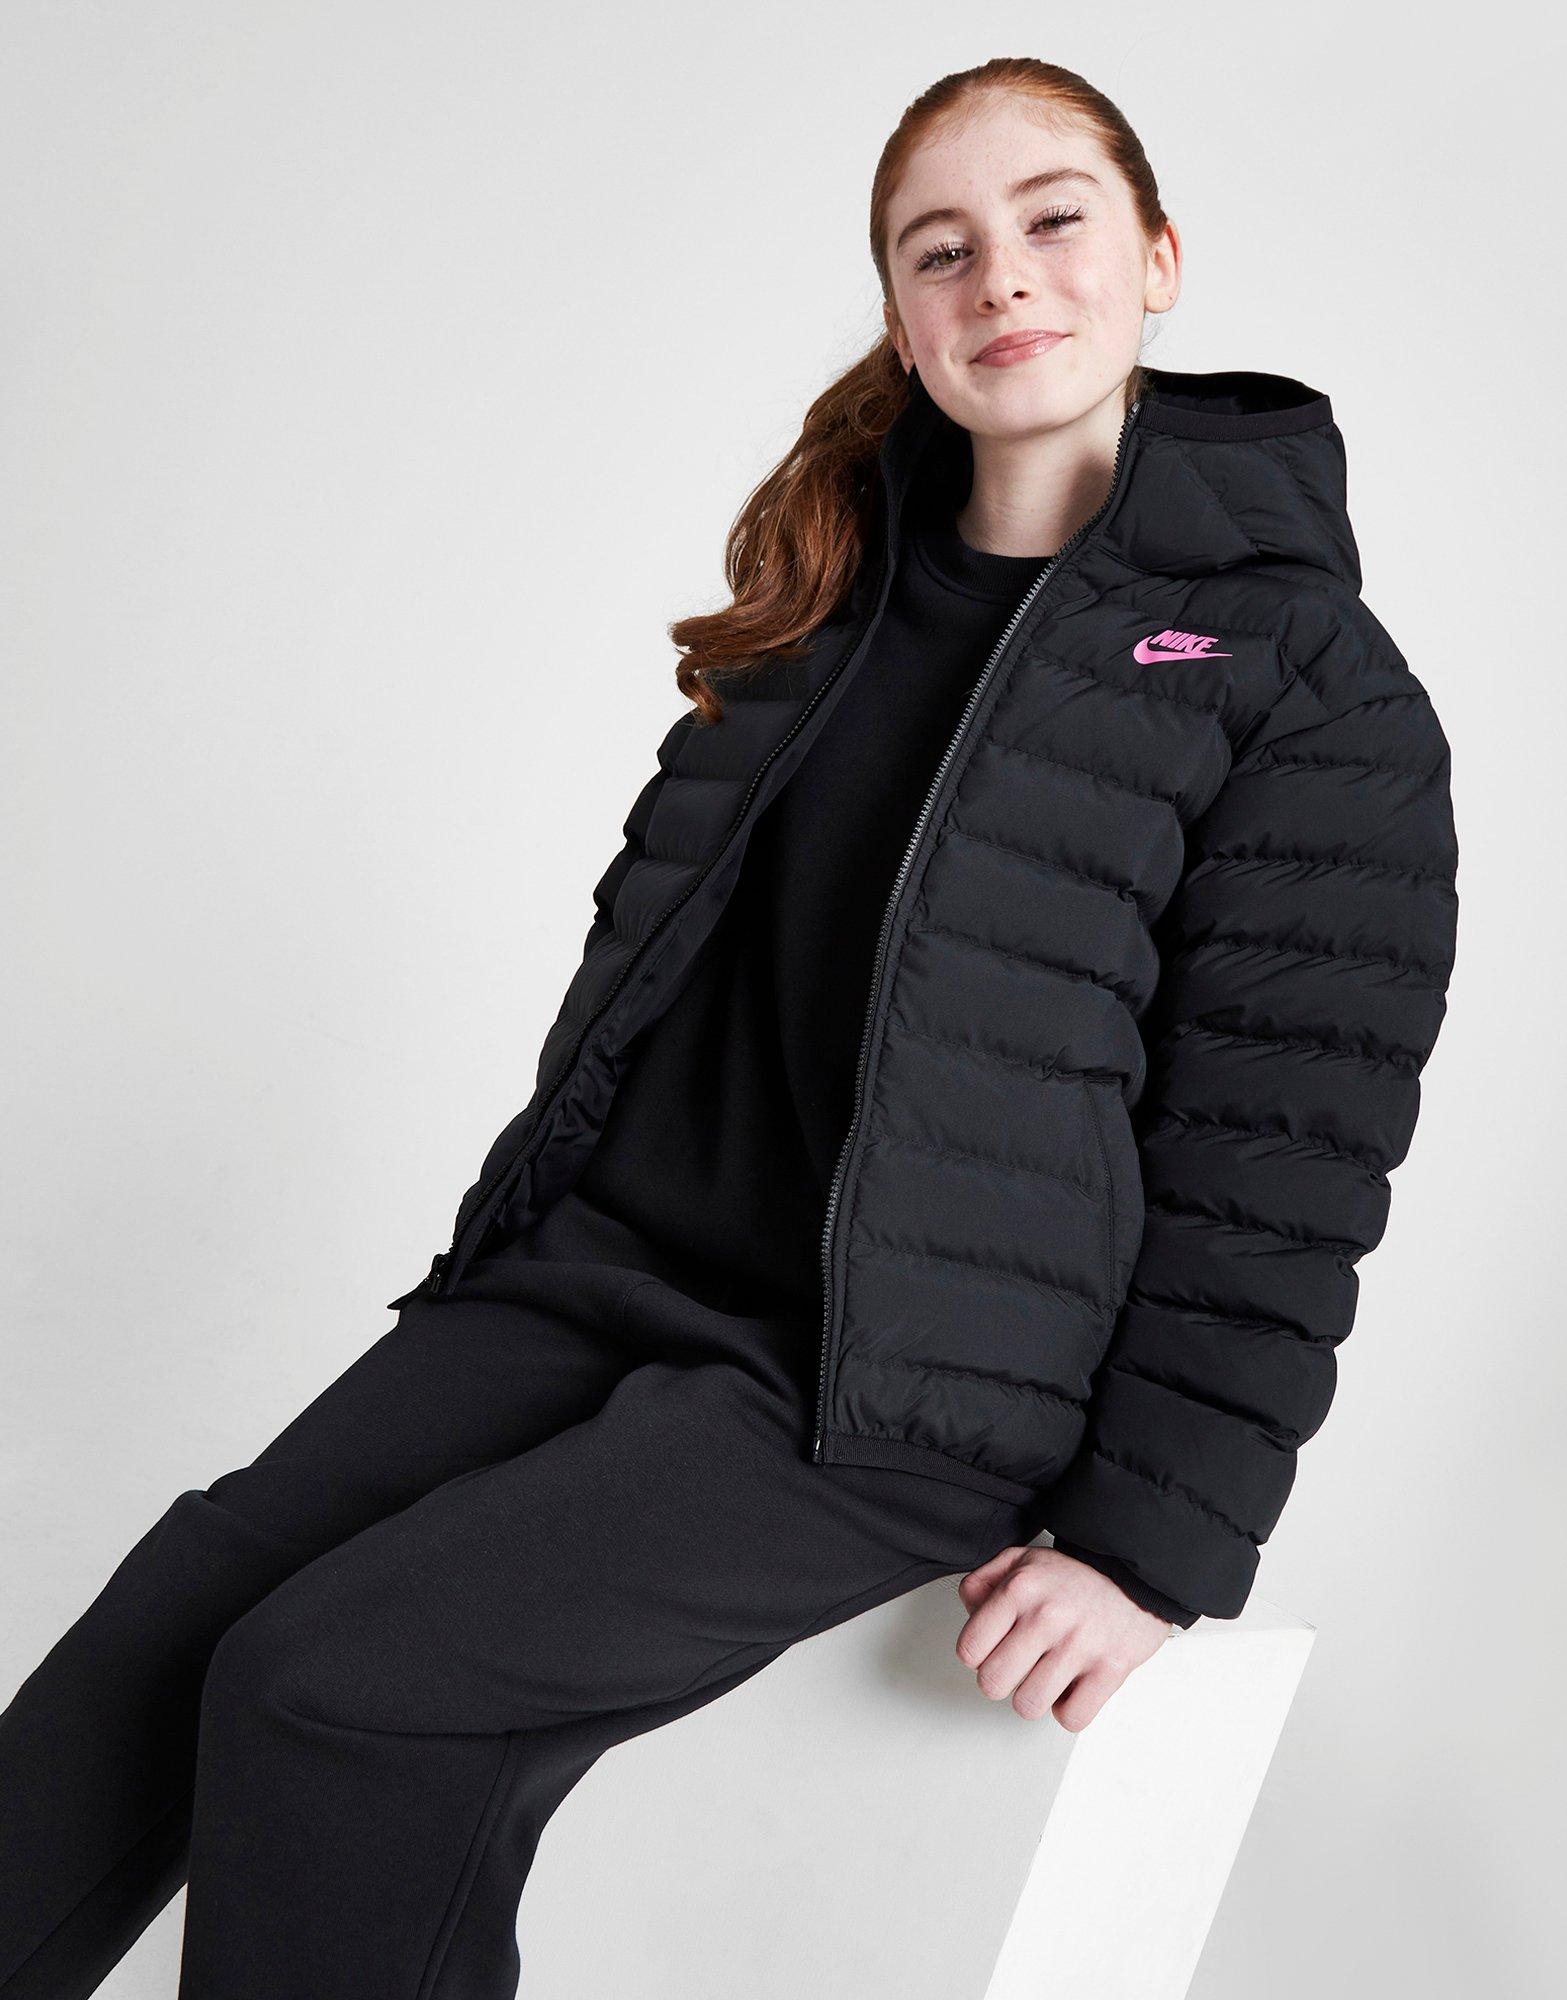 Nike Plus classic padded jacket with hood in black